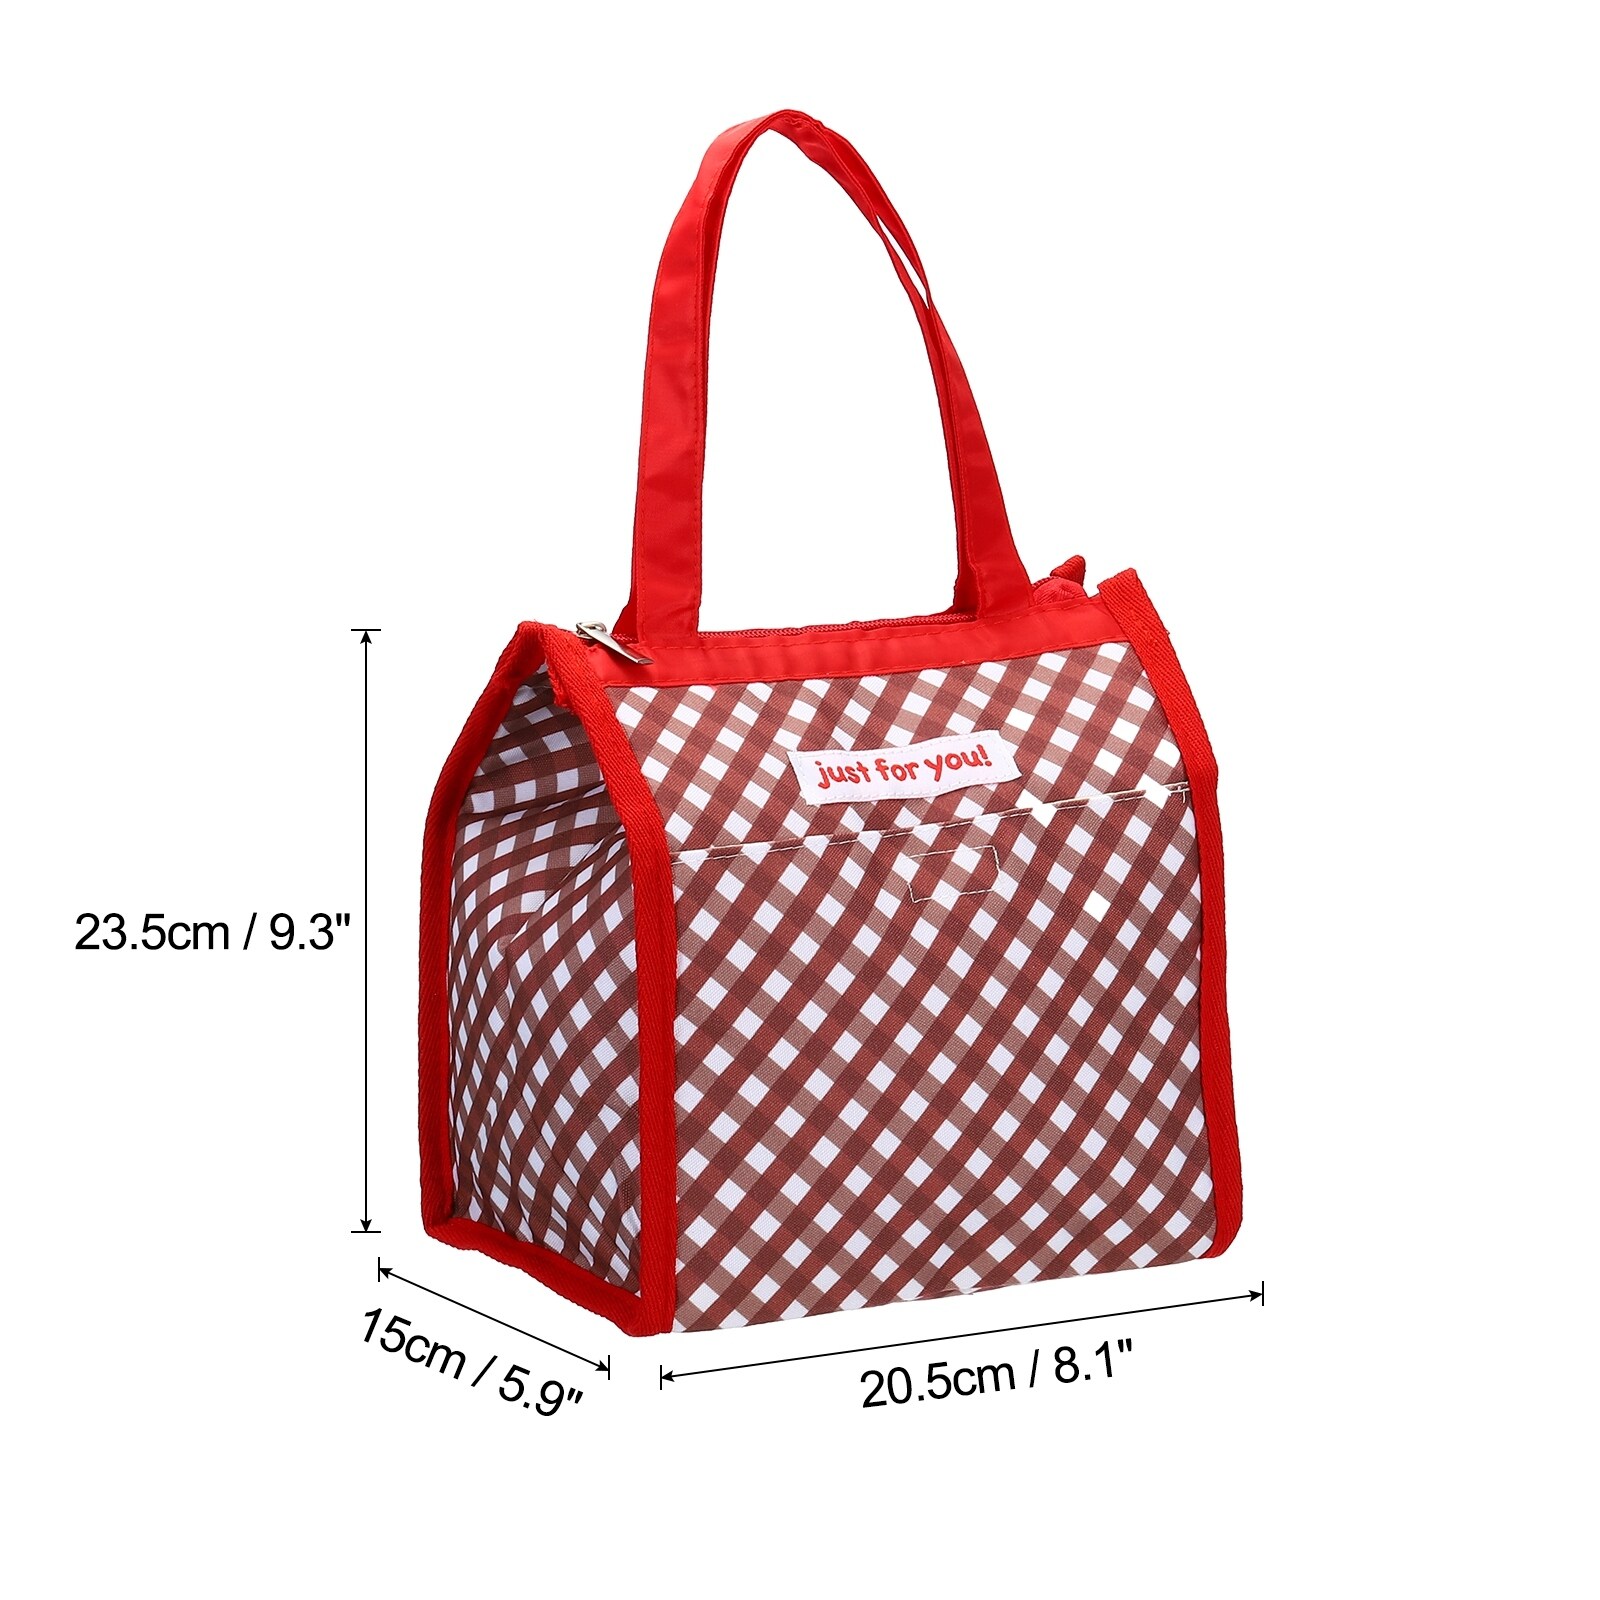 Built Icehouse Gel Cube Insulating Lunch Bag in Pink Cat Pattern 